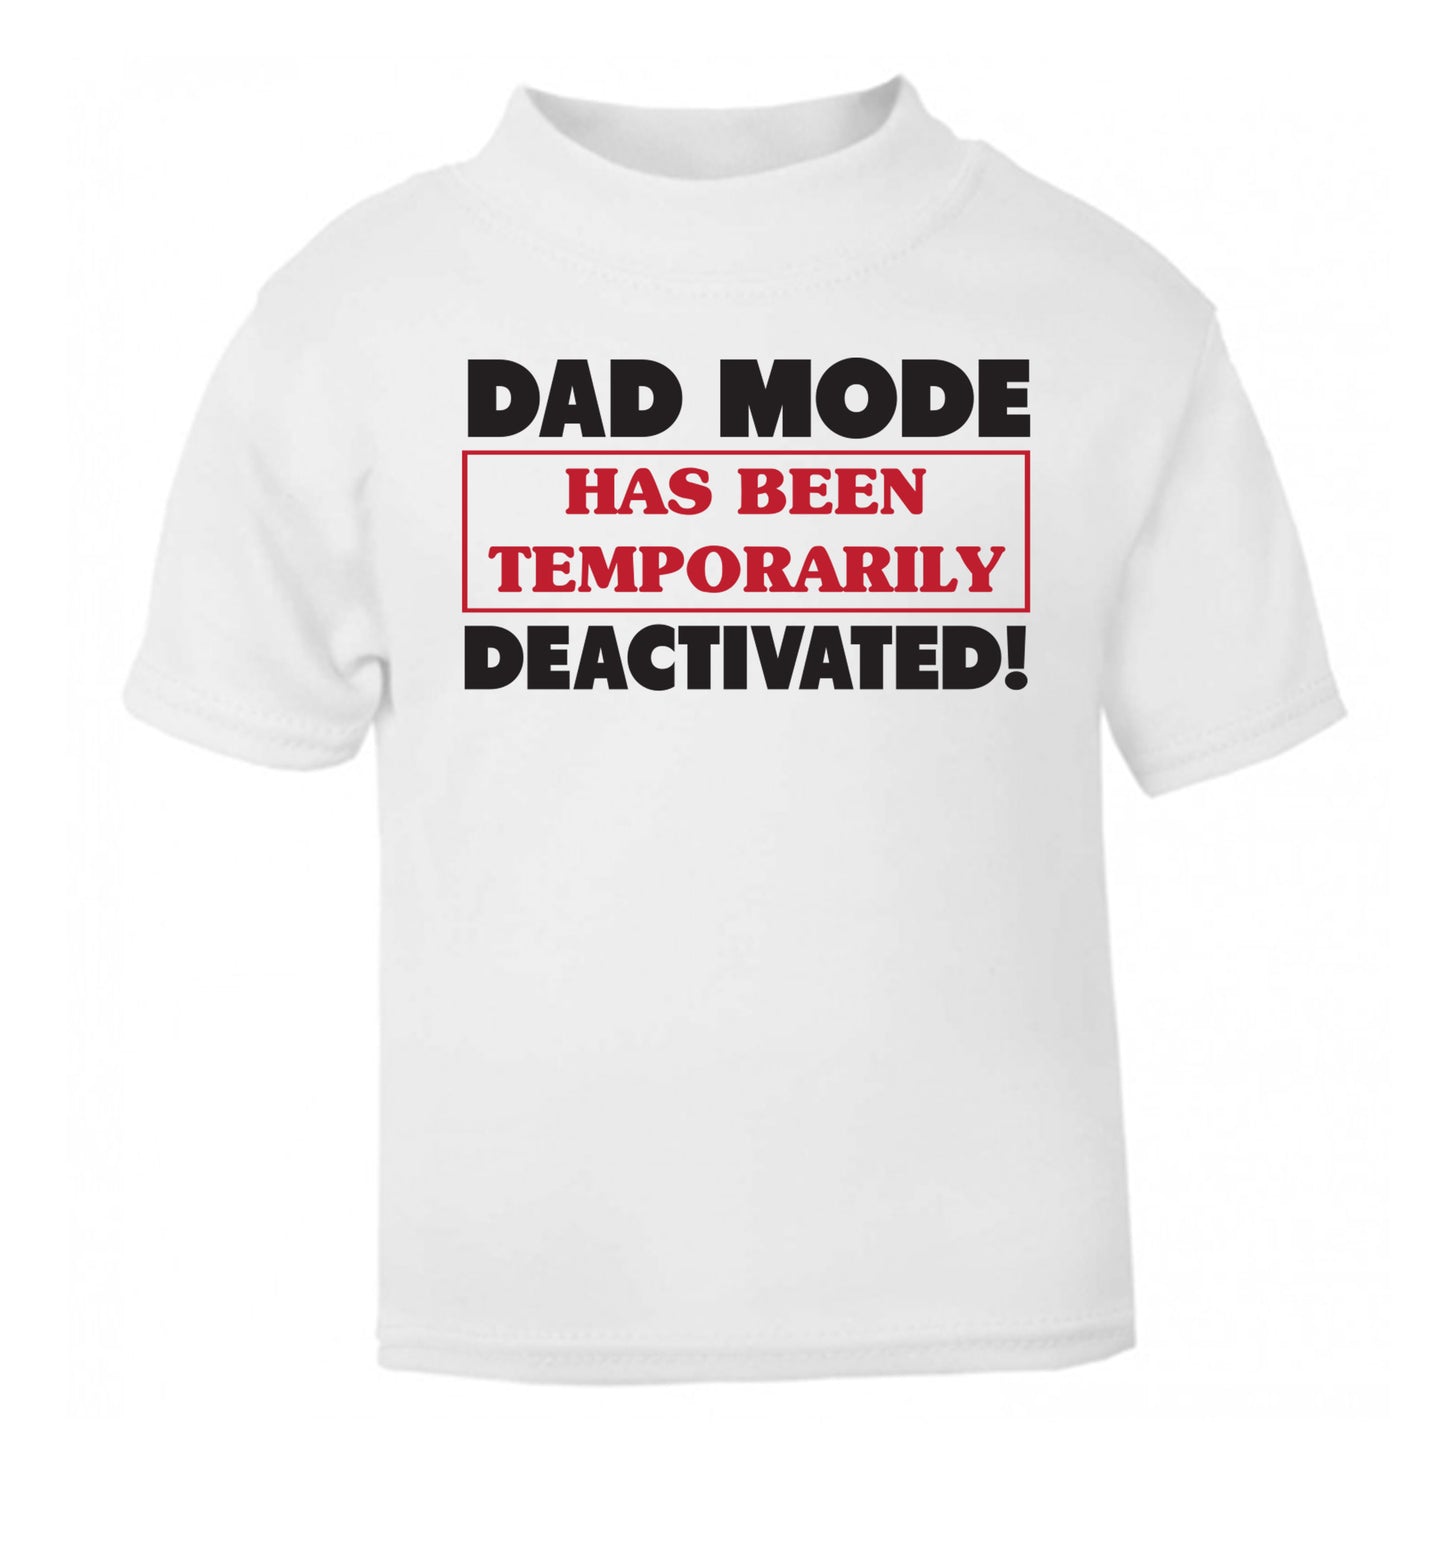 Dad mode has been temporarily deactivated! white Baby Toddler Tshirt 2 Years